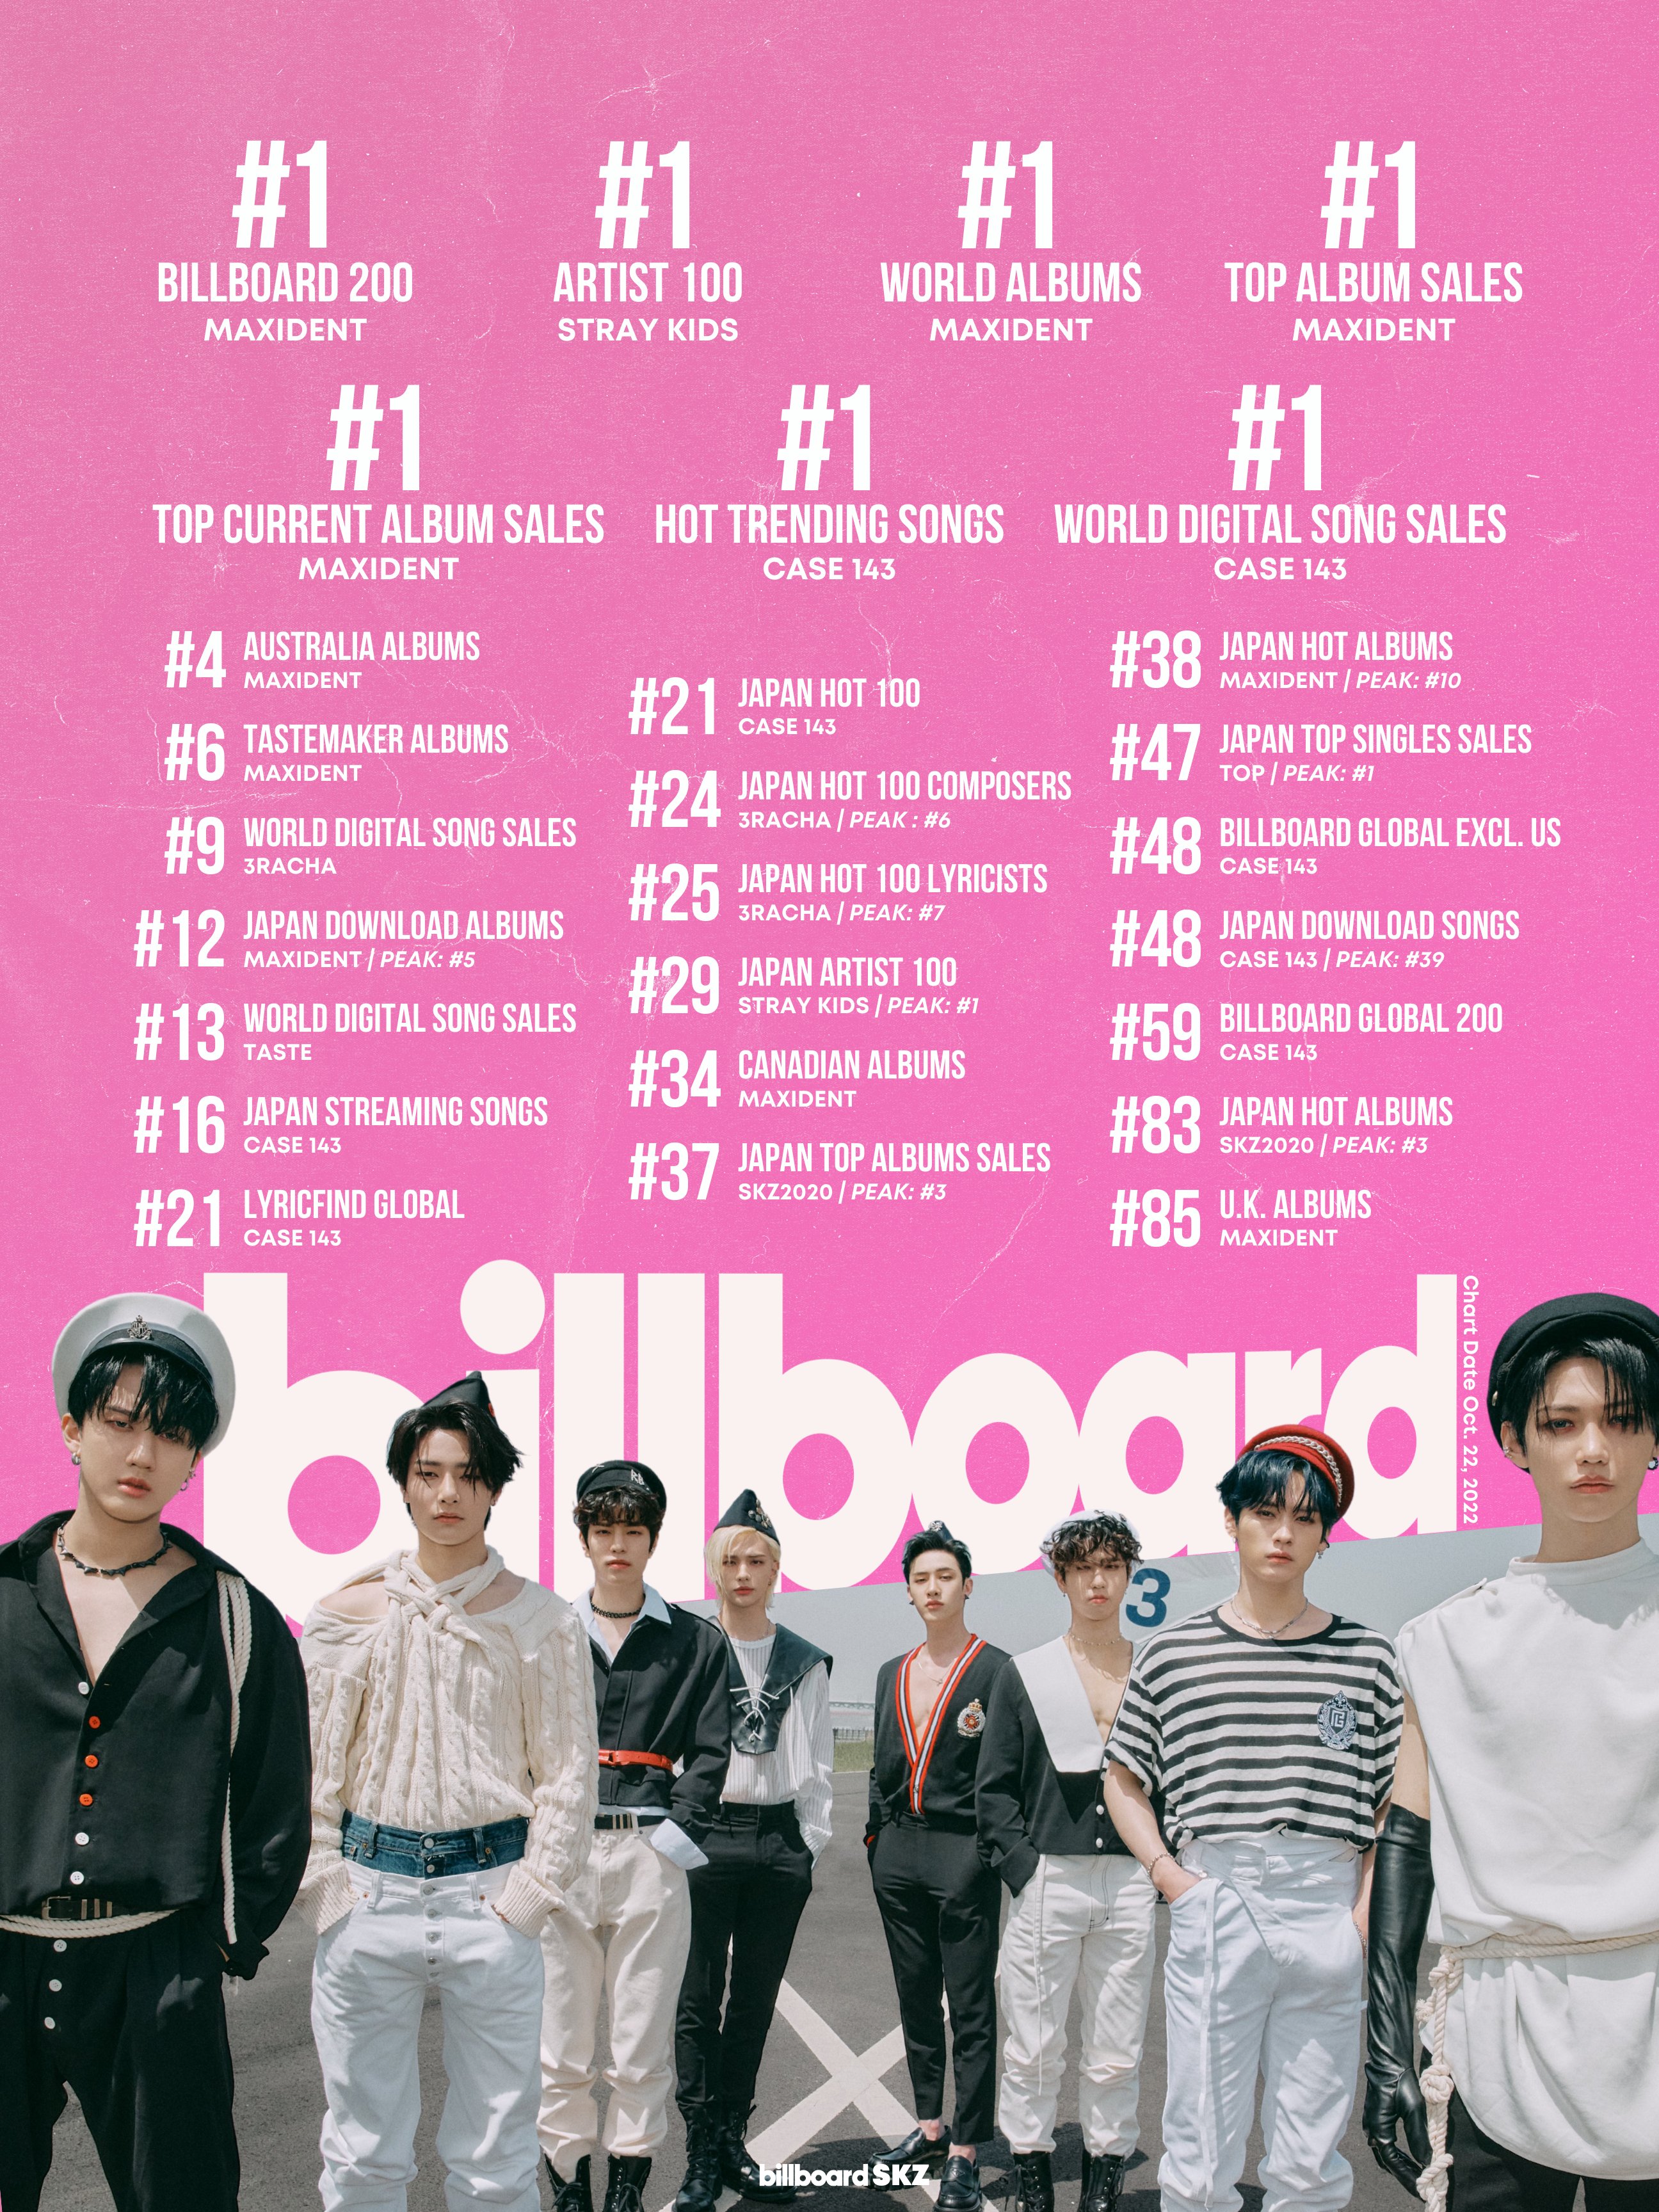 Stray Kids' “ROCK-STAR” Returns To No. 1 On Billboard's World Albums Chart  + Spends 3rd Week In Top 11 Of Billboard 200